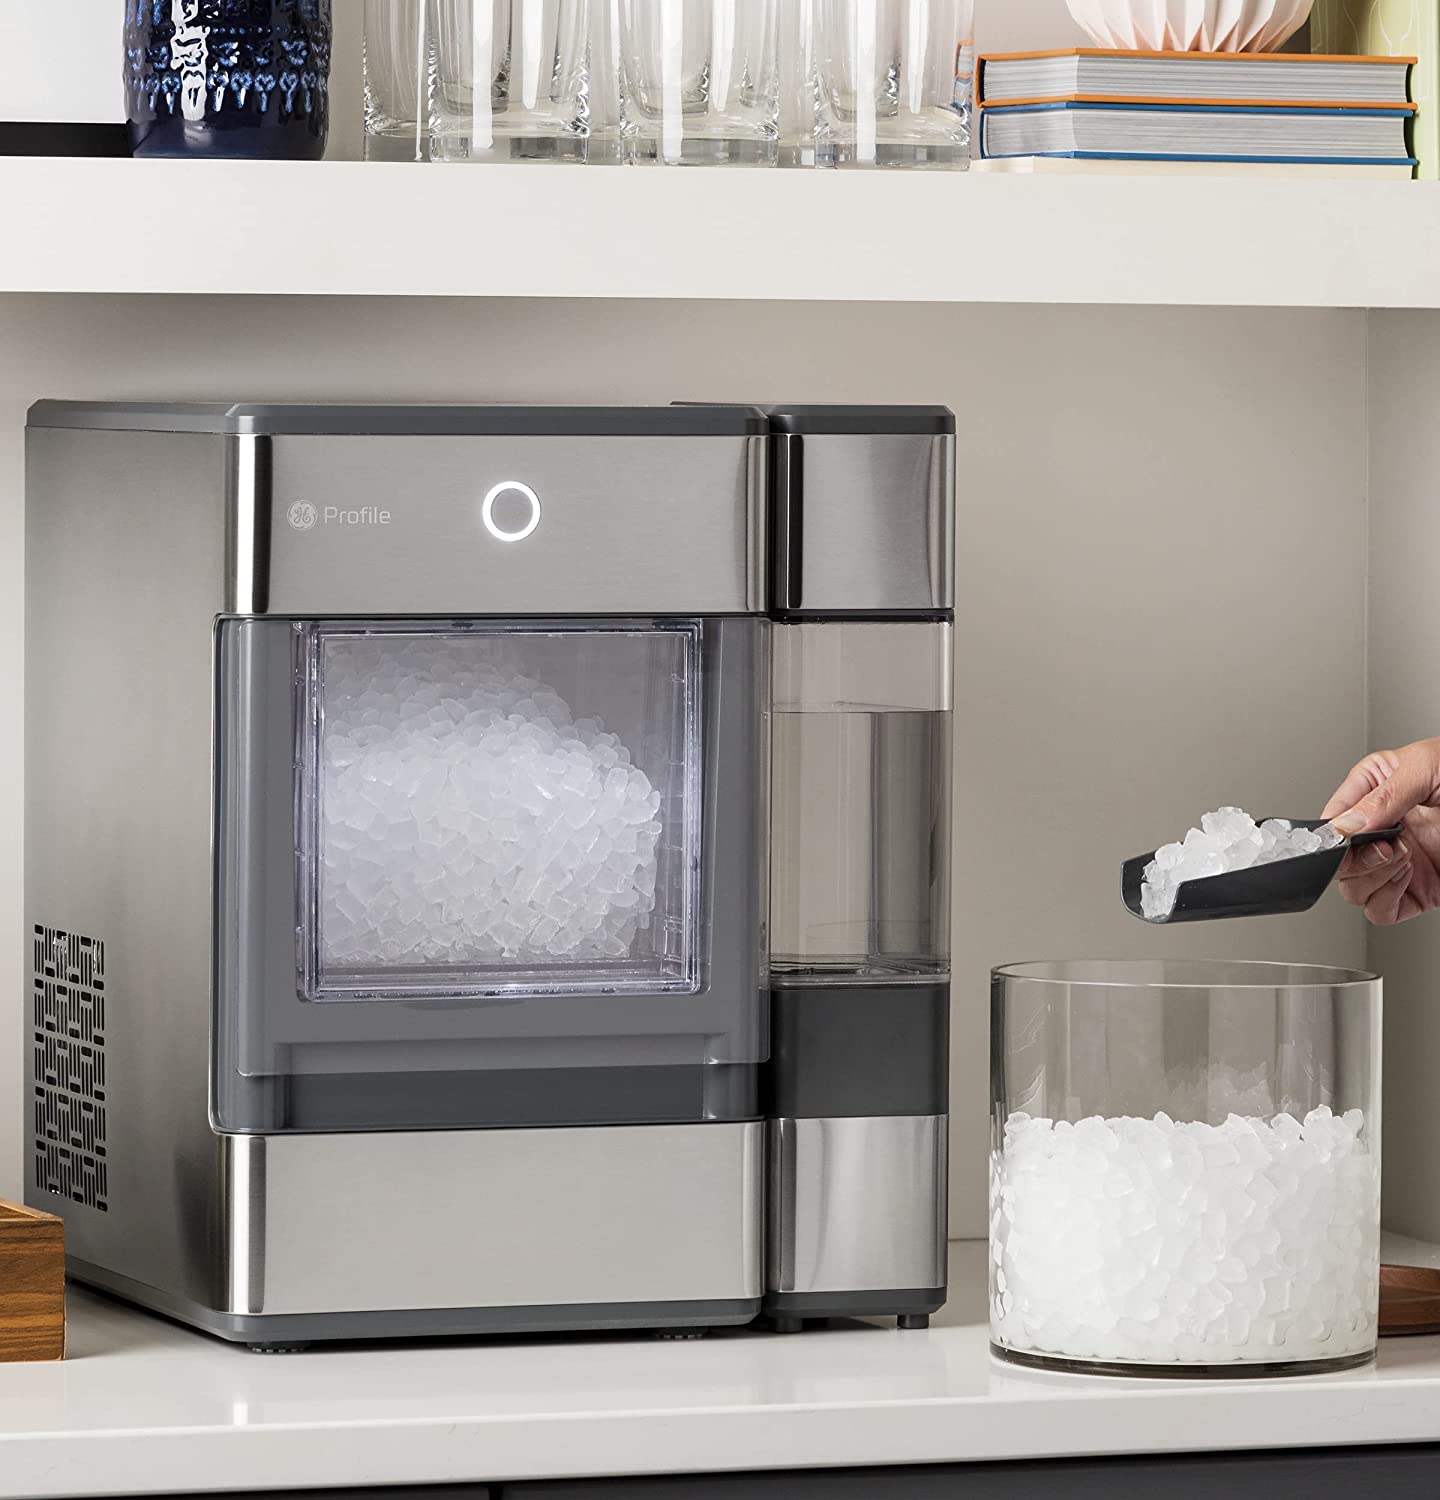 GE Profile Opal | Countertop Nugget Ice Maker with Side Tank | Portable Ice Machine Makes up to 24 lbs. of Ice Per Day | Stainless Steel Finish